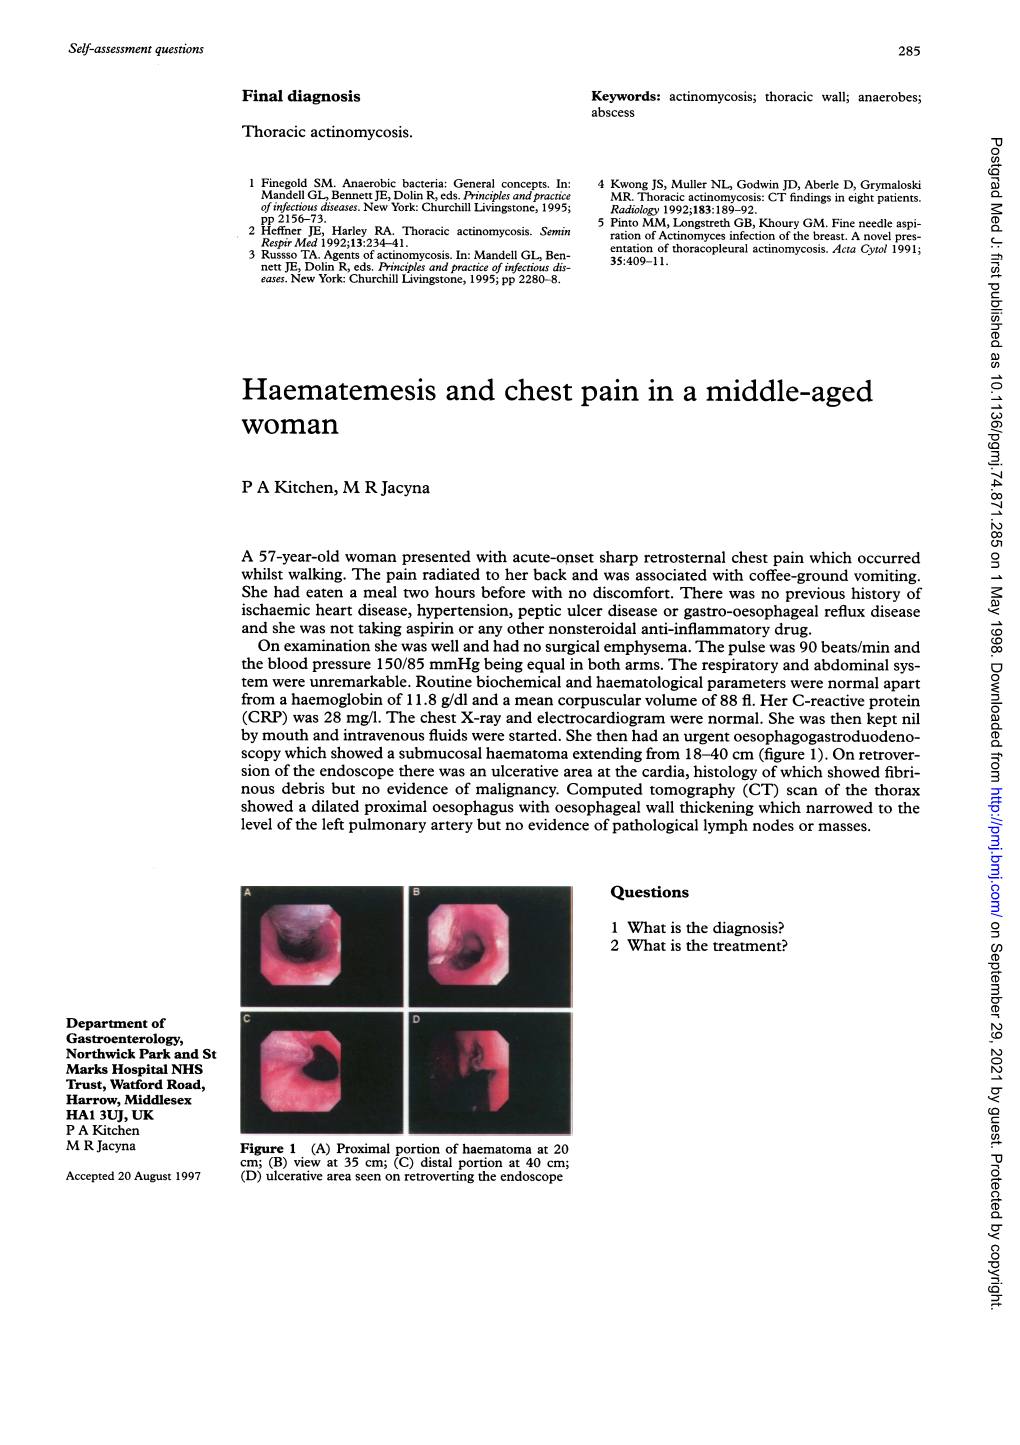 Haematemesis and Chest Pain in a Middle-Aged Woman